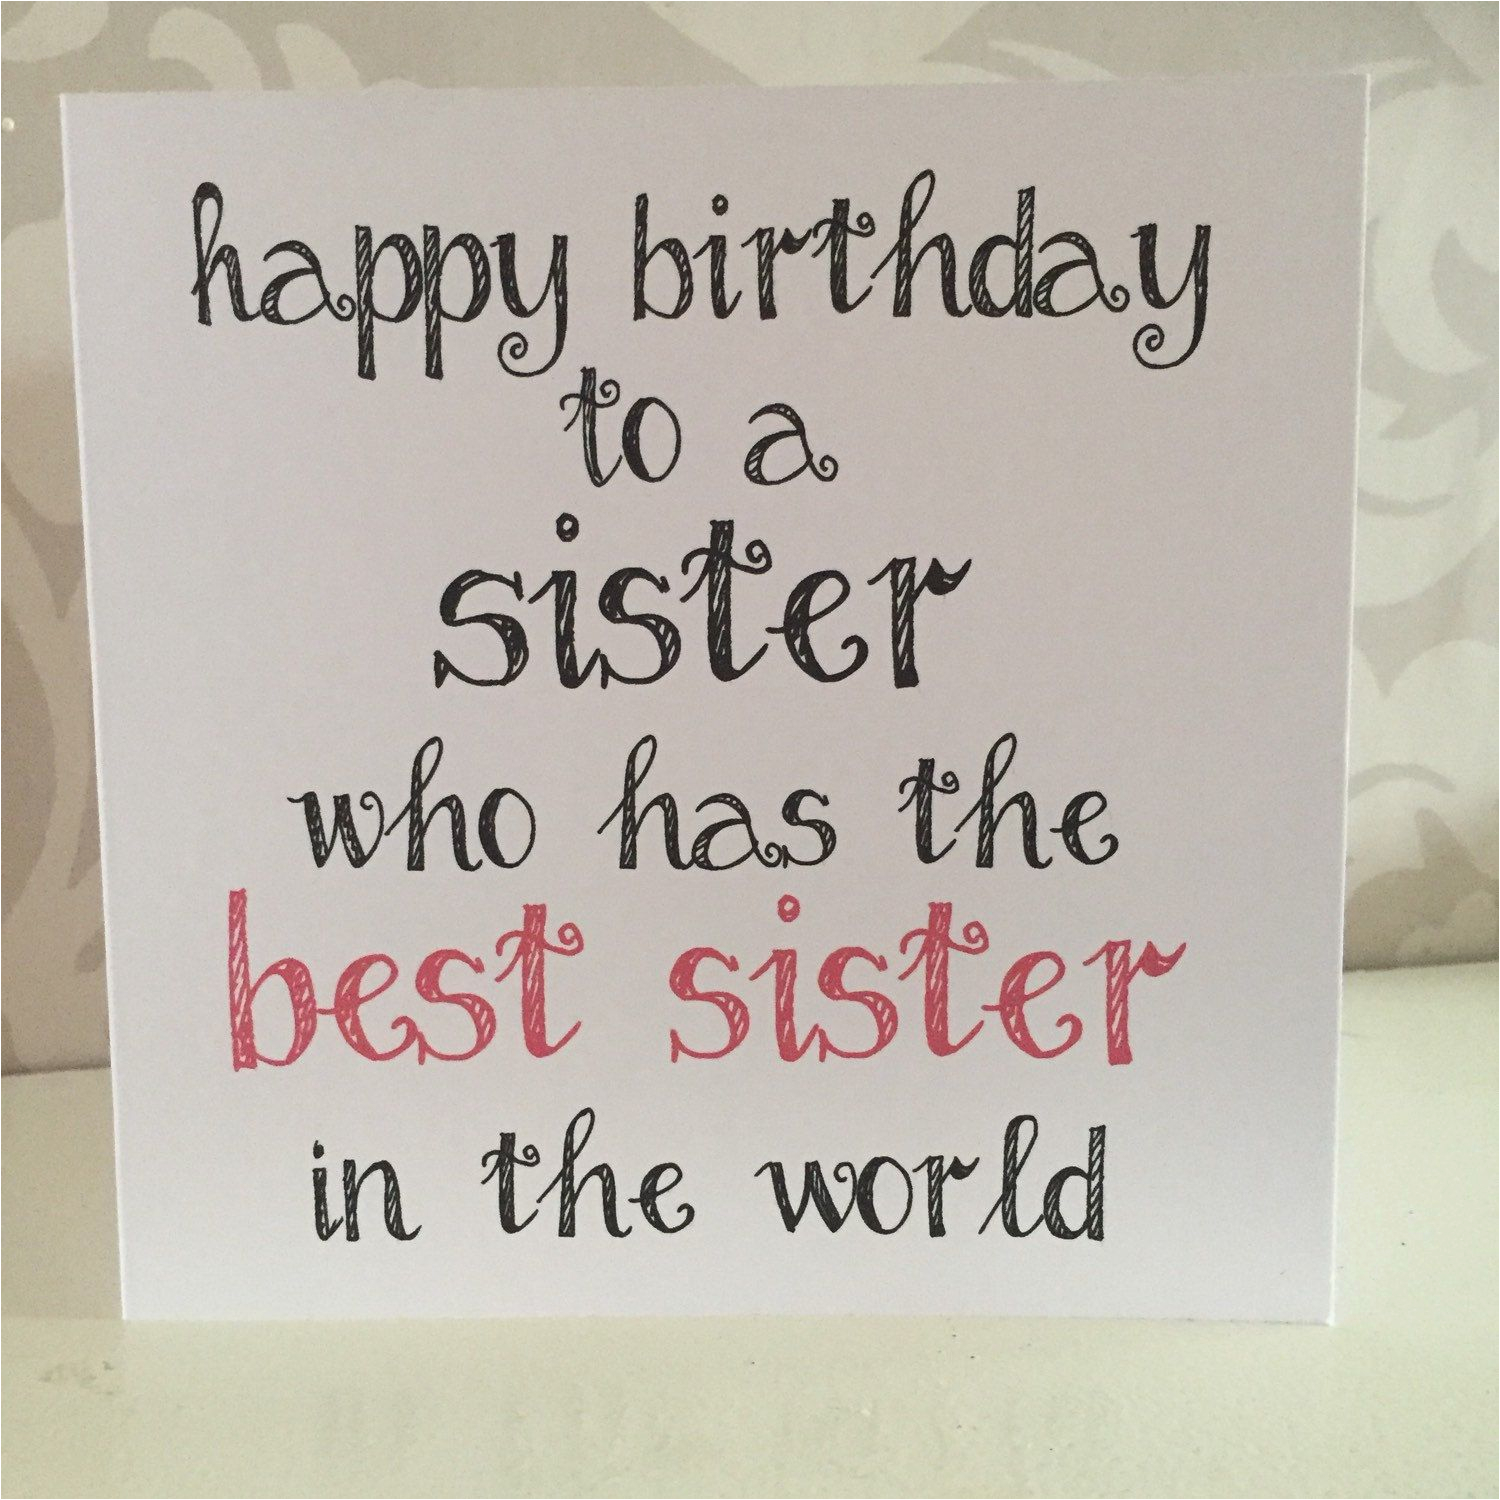 what-to-write-in-a-birthday-card-for-sister-funny-bitrhday-gallery